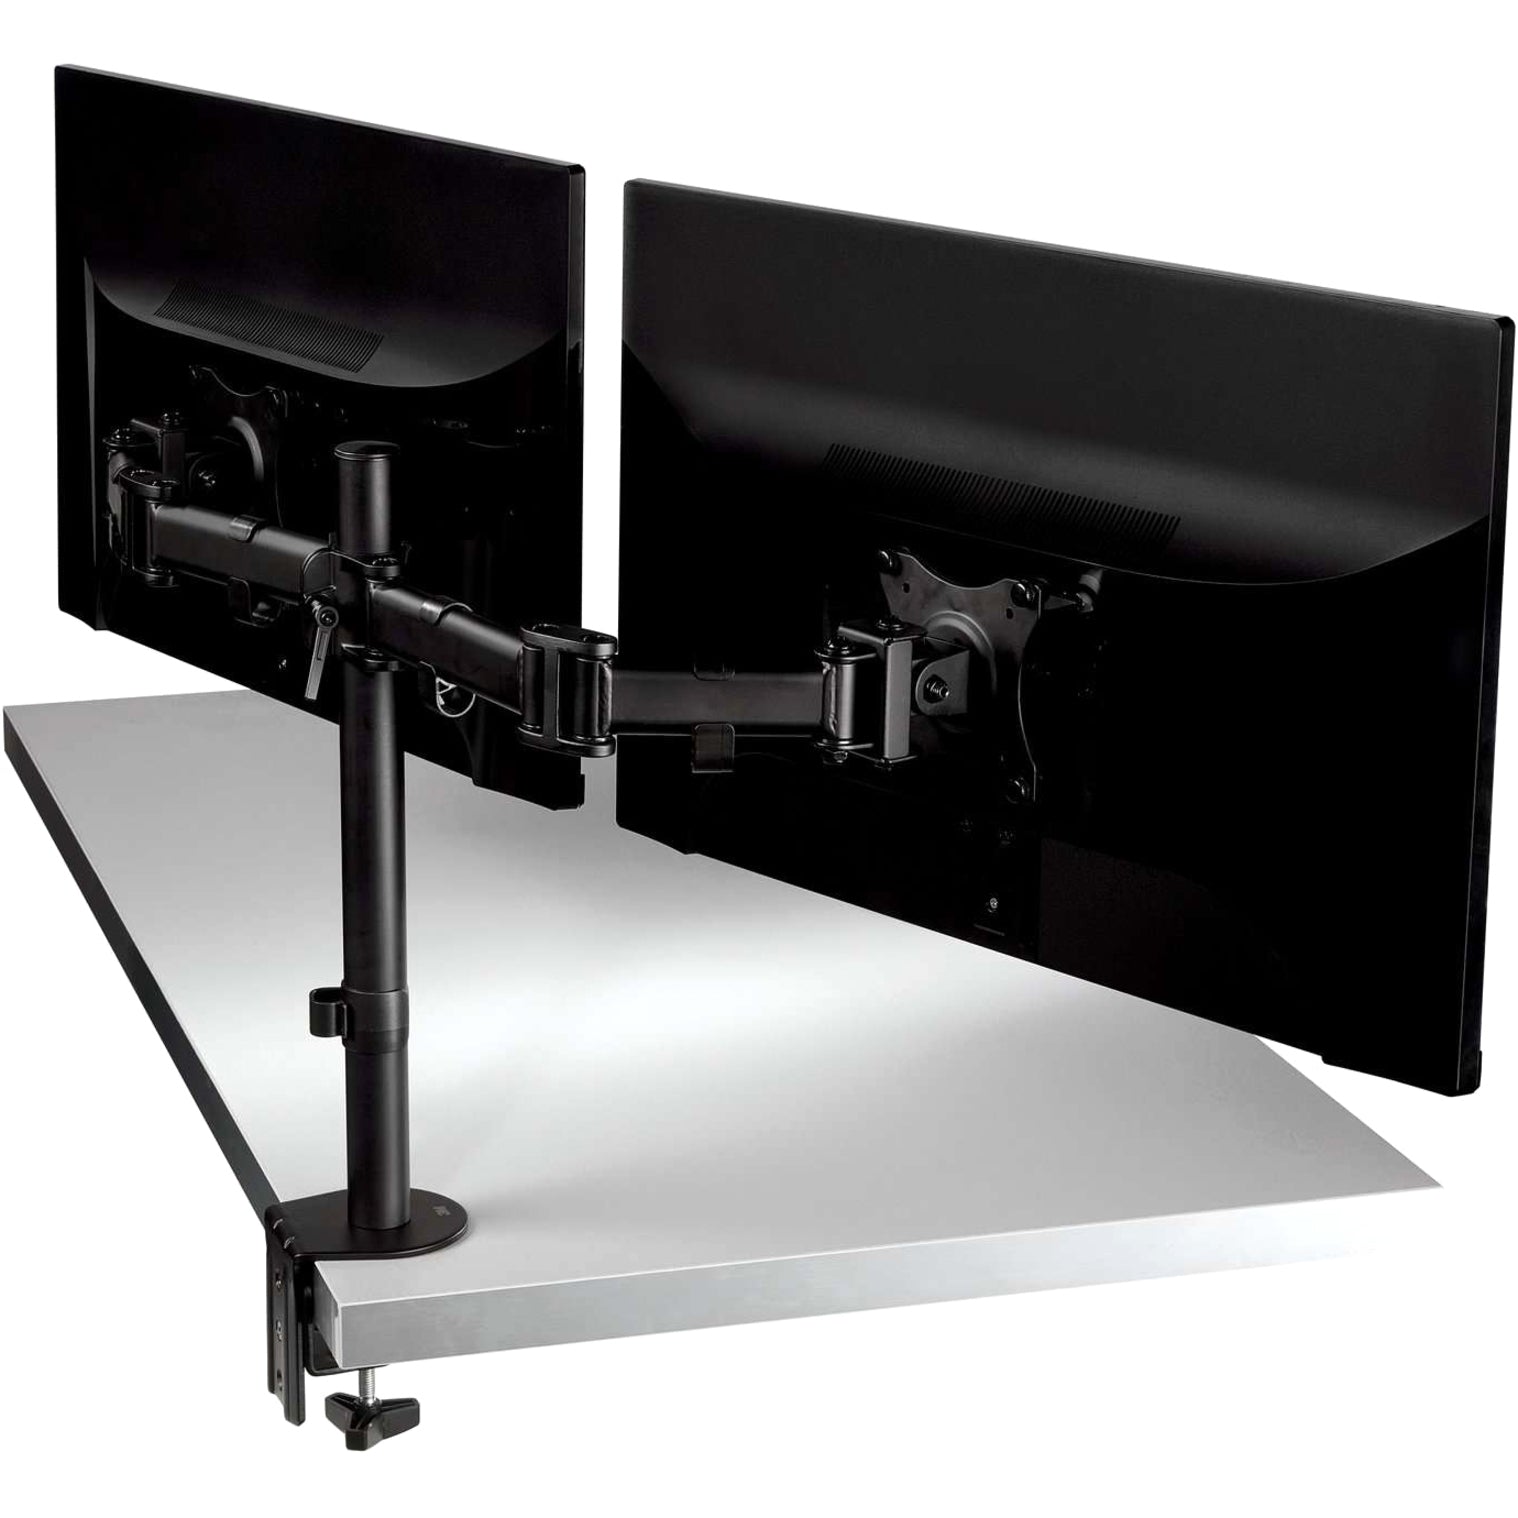 3M MM200B Dual Monitor Mount, Clamp Mount for Monitor - Black, Height Adjustable, 40 lb Maximum Load Capacity, Supports 2 Displays, Maximum Screen Size Supported 28.5"